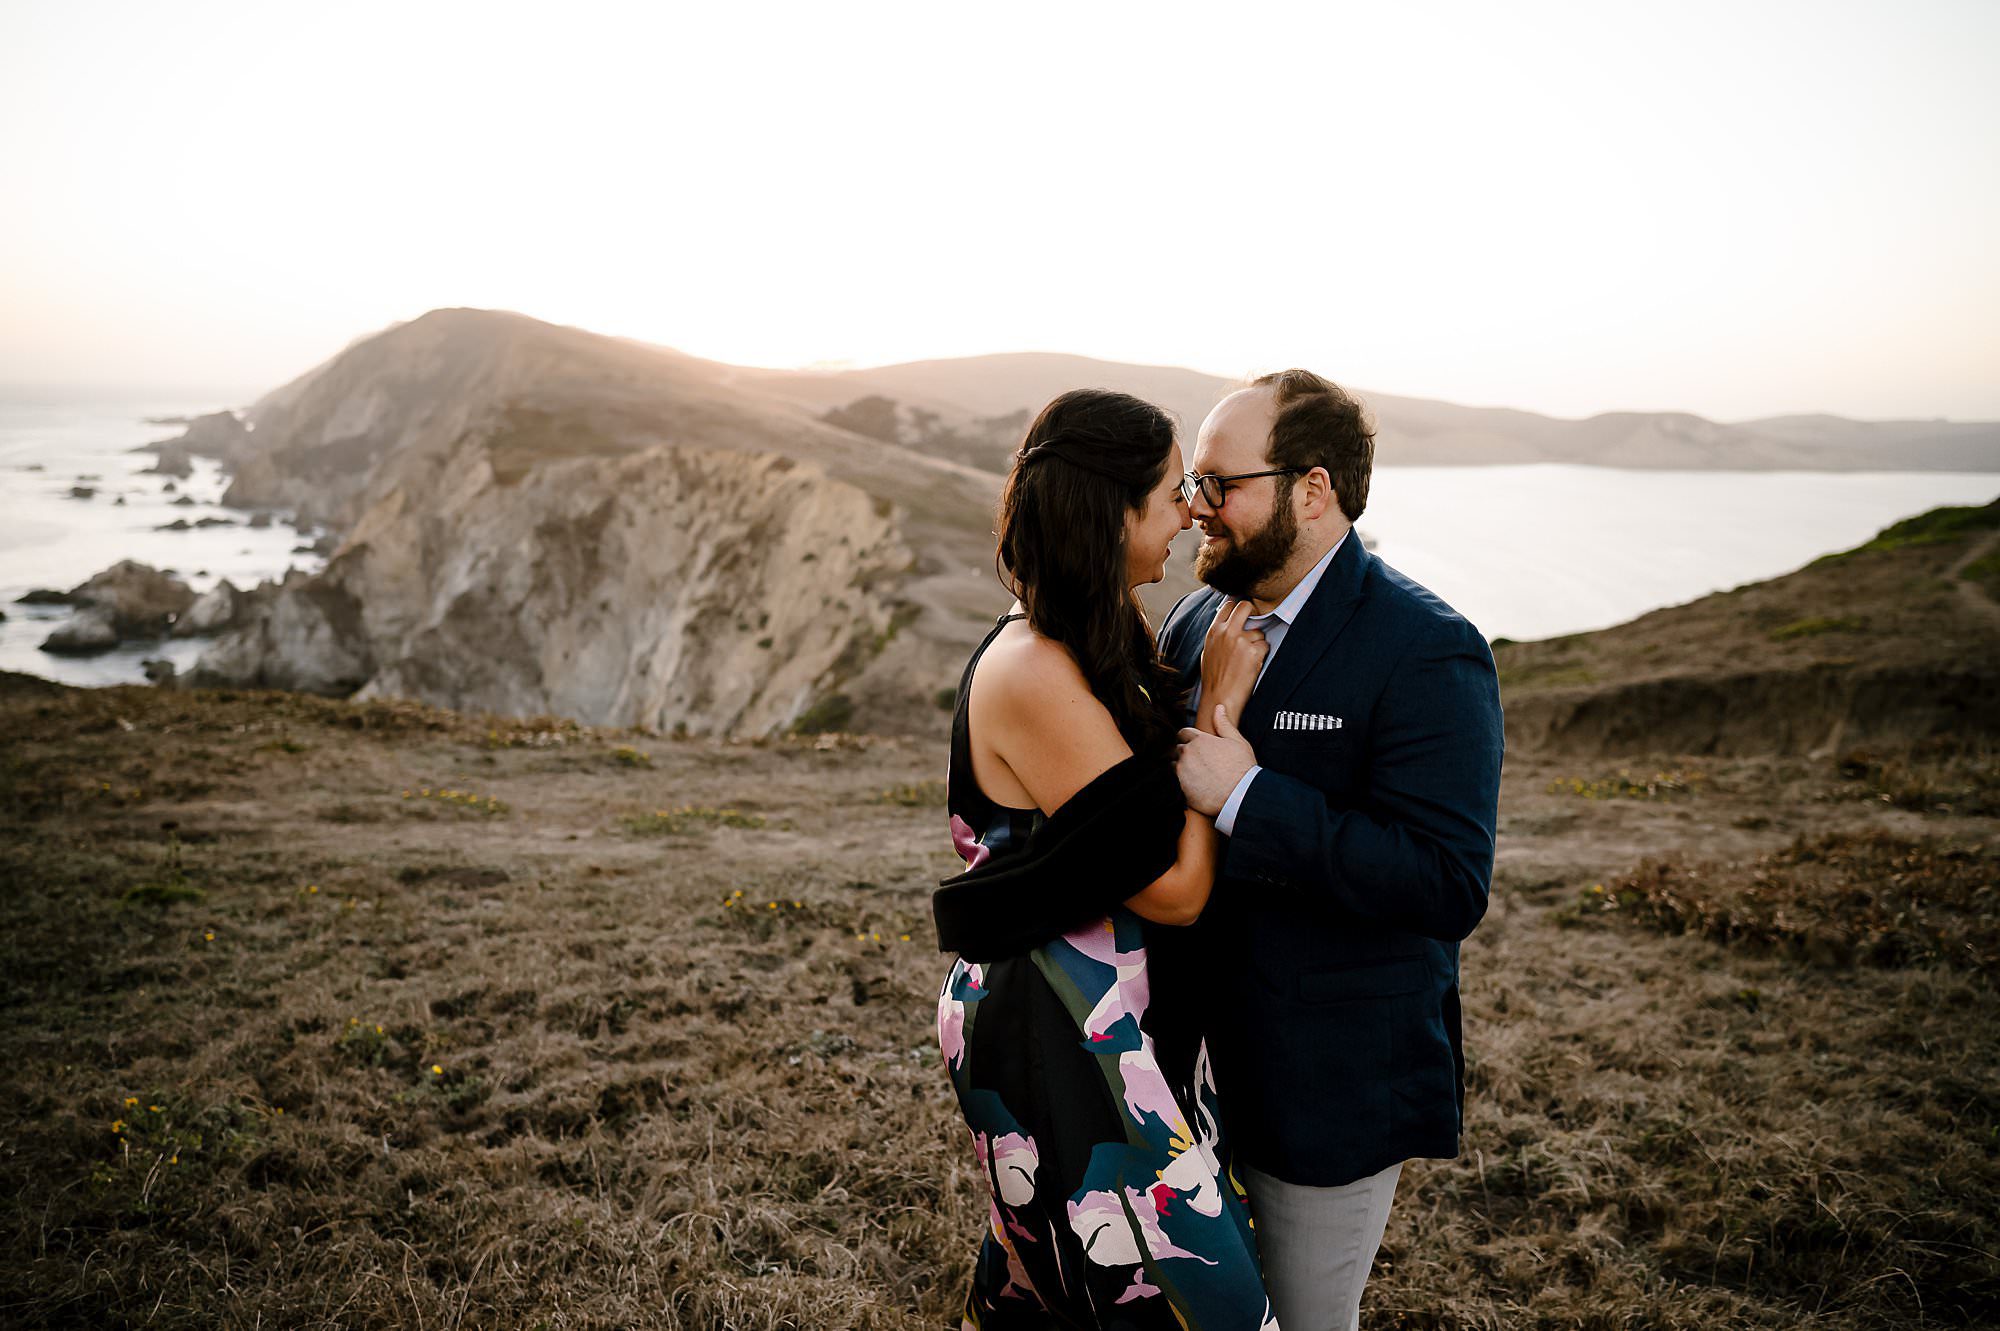 Engaged couple embracing on top of the cliffs on a sunset hike to Chimney Rock in Pt Reyes